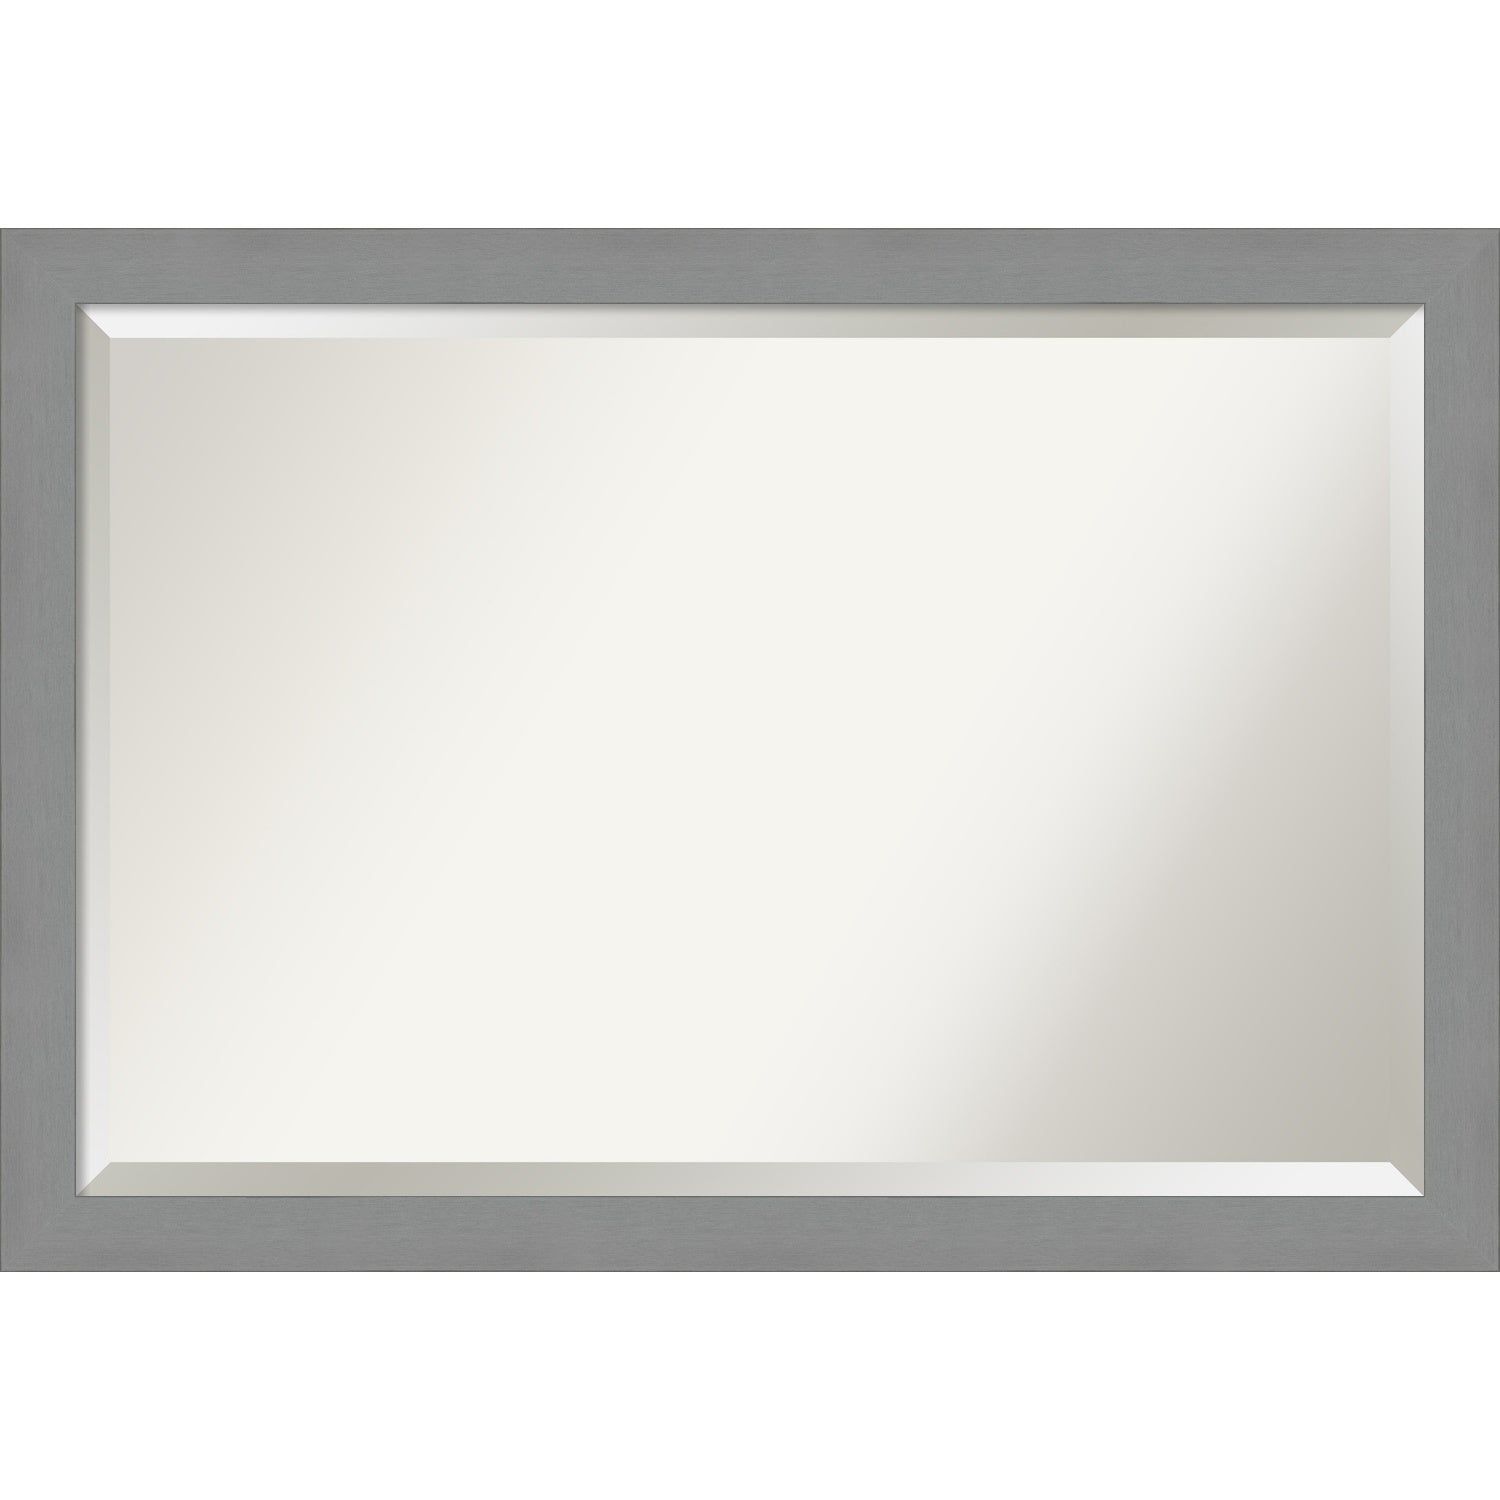 Accent Mirrors | Shop Online At Overstock Throughout Derick Accent Mirrors (View 19 of 30)